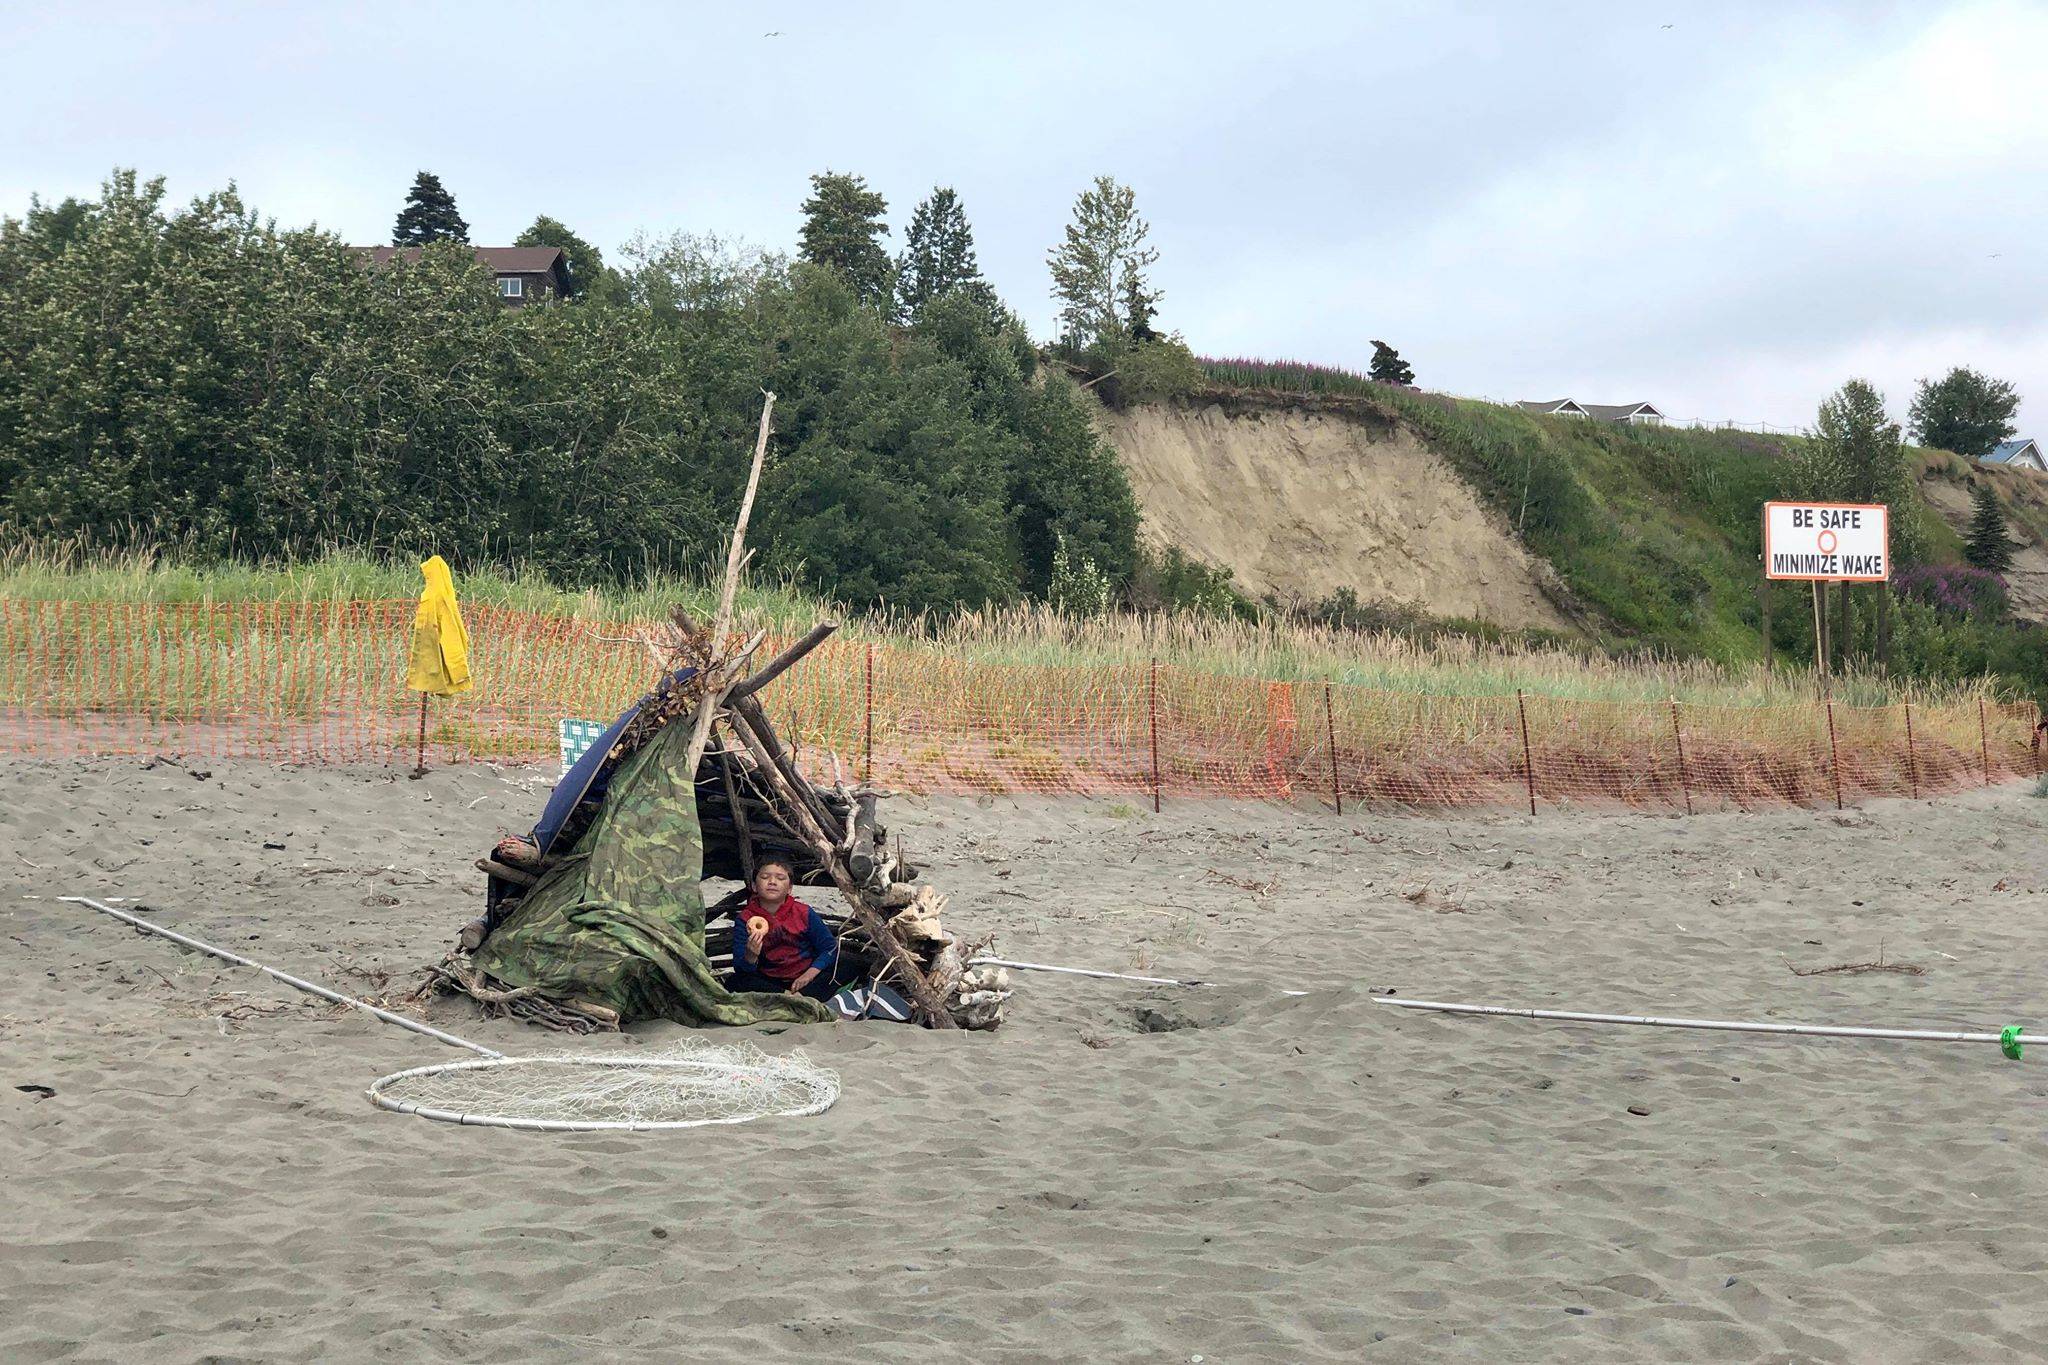 A child sits on the beach in a homemade shelter on the first day of the Kenai River personal use dipnet fishery, Wednesday, July 10, 2019, in Kenai, Alaska. (Photo by Victoria Petersen/Peninsula Clarion)